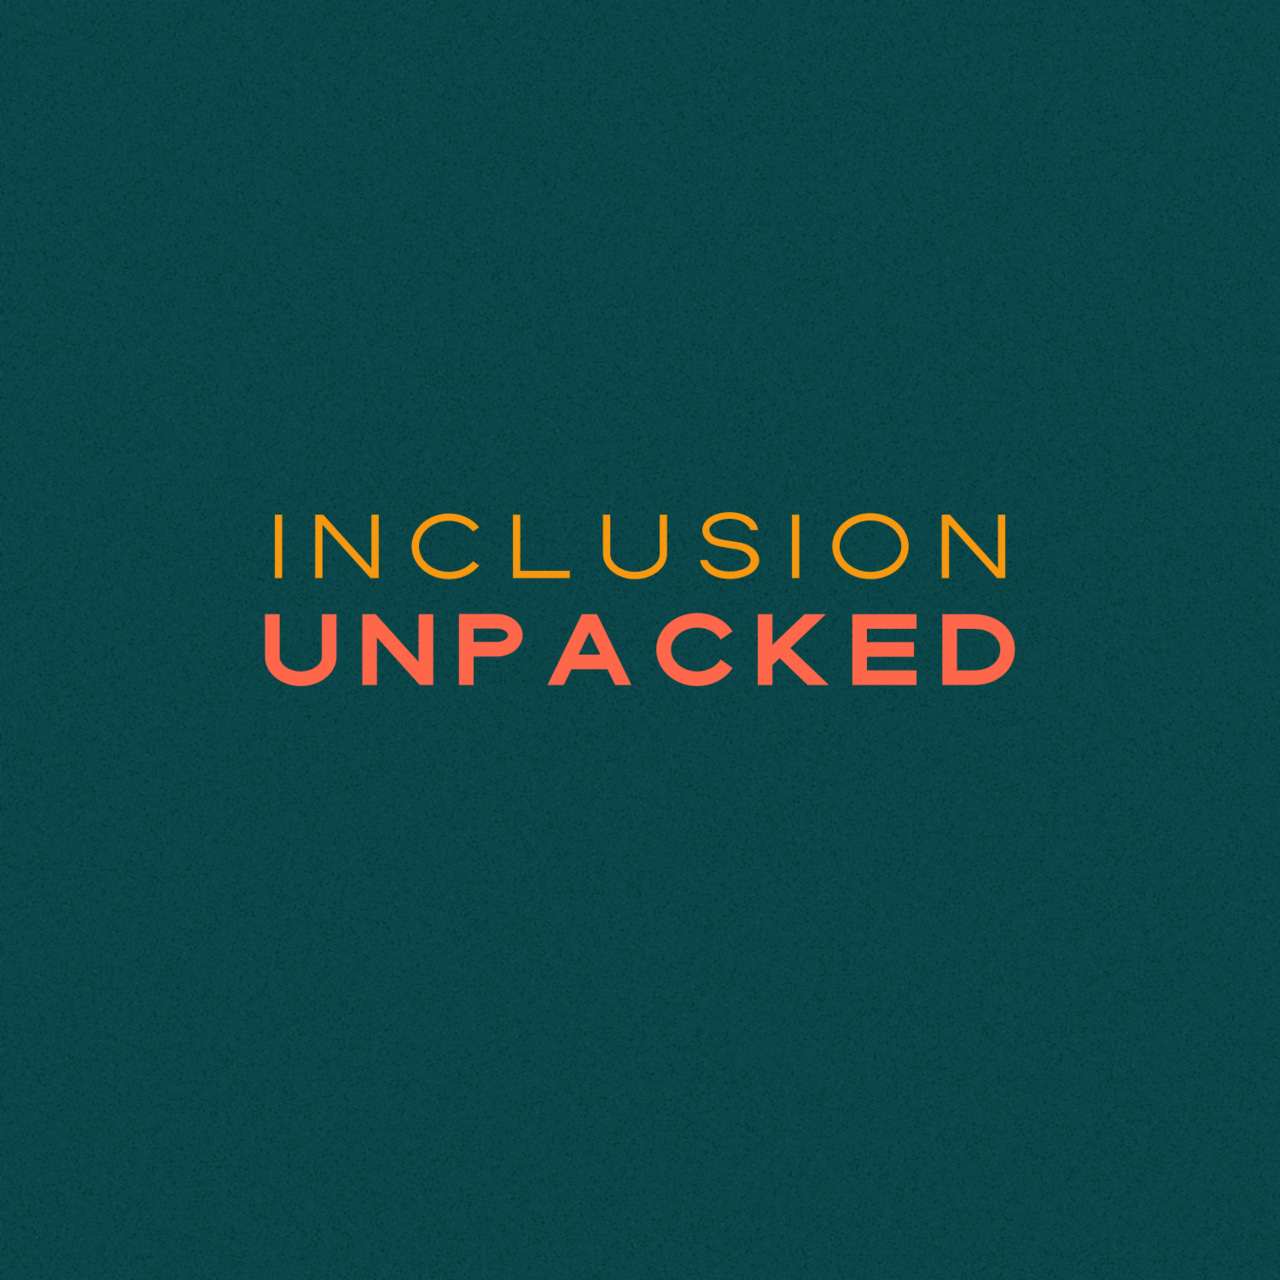 Inclusion Unpacked